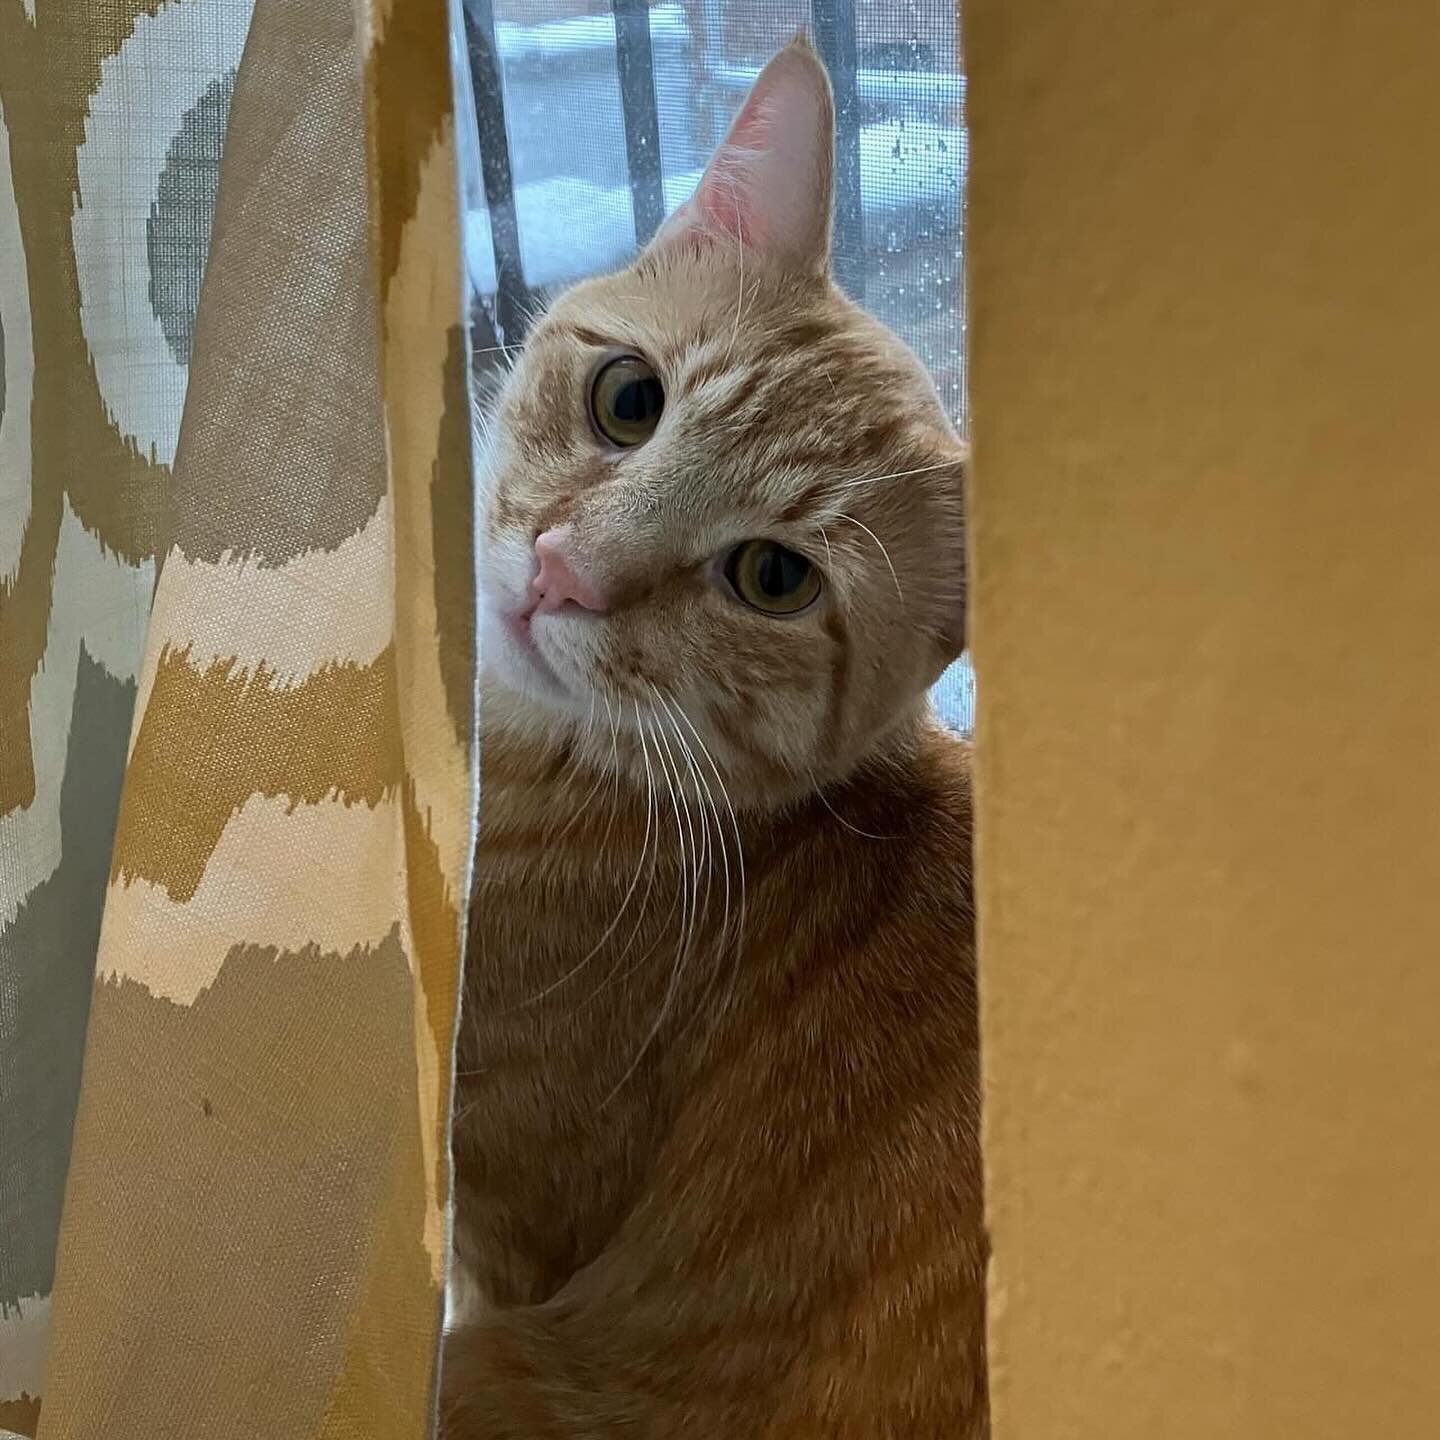 🍊 Loon 🍊 

Loon is an amazing 1 yr old cat who is soo ready for adoption! 

He was rescued from Long Island, and at his first foster home he would not come out of hiding AT ALL! He moved into a second foster home where he could be the only cat, and